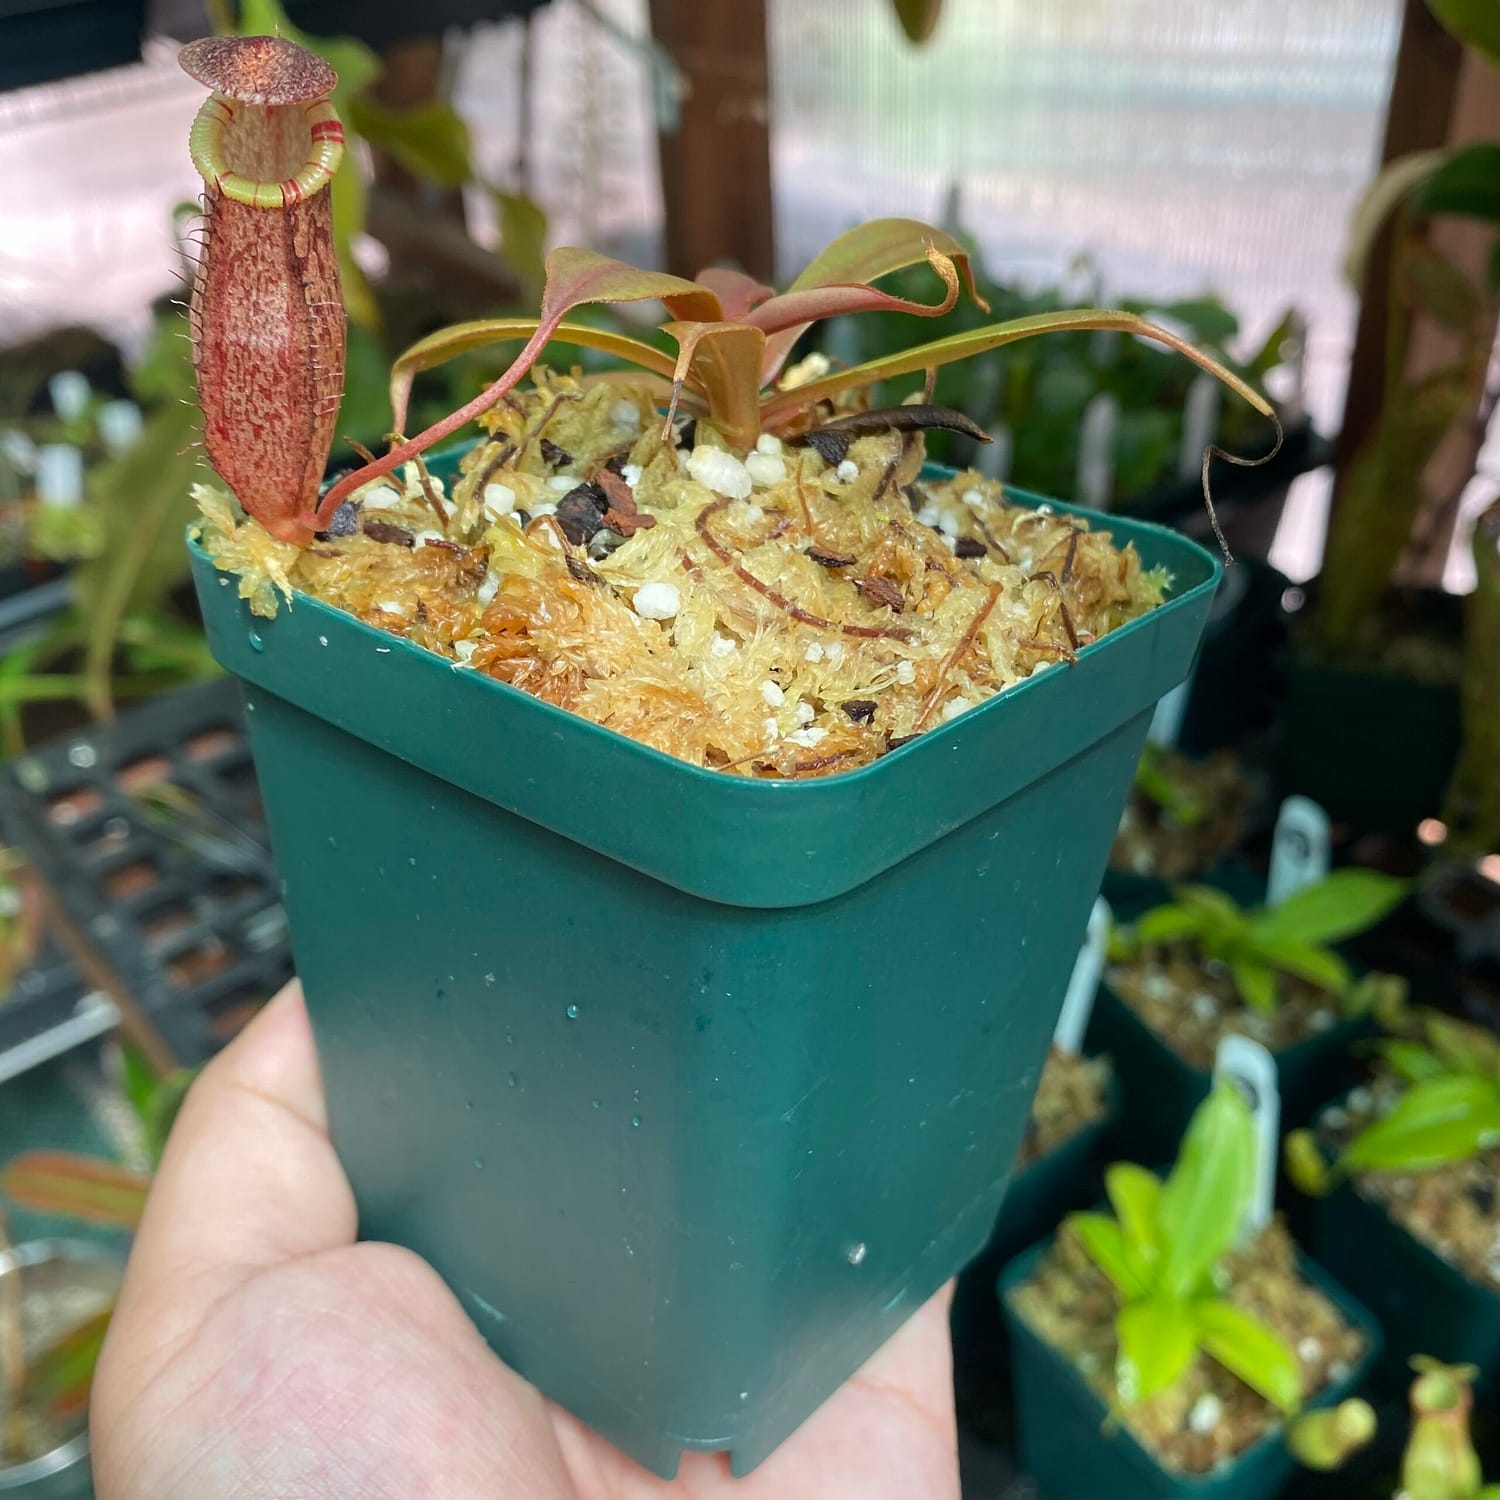 A hand holding a Nepenthes spectabilis plant in a green container